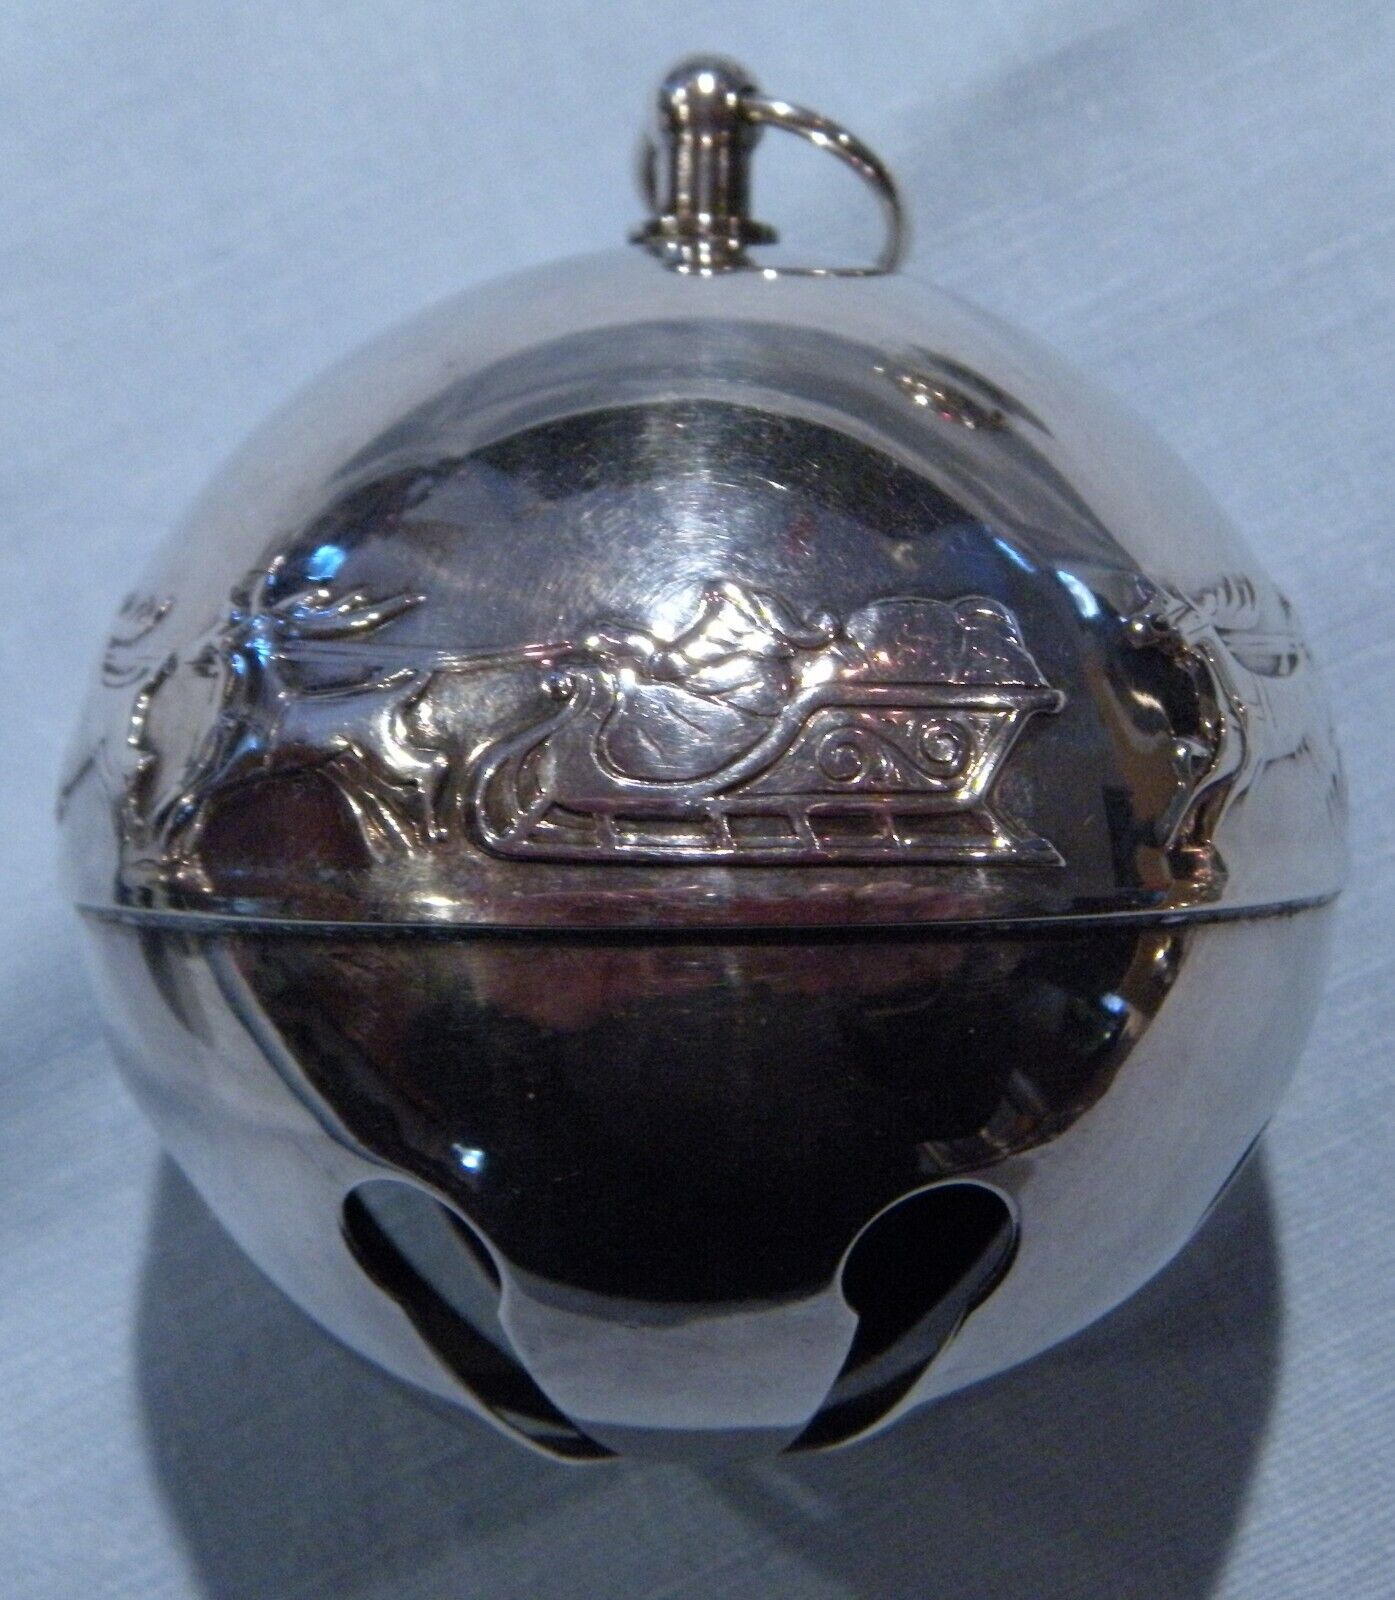 WALLACE SILVER PLATED ANNUAL SLEIGH BELLS 14 Years are Available. Made in U.S.A.